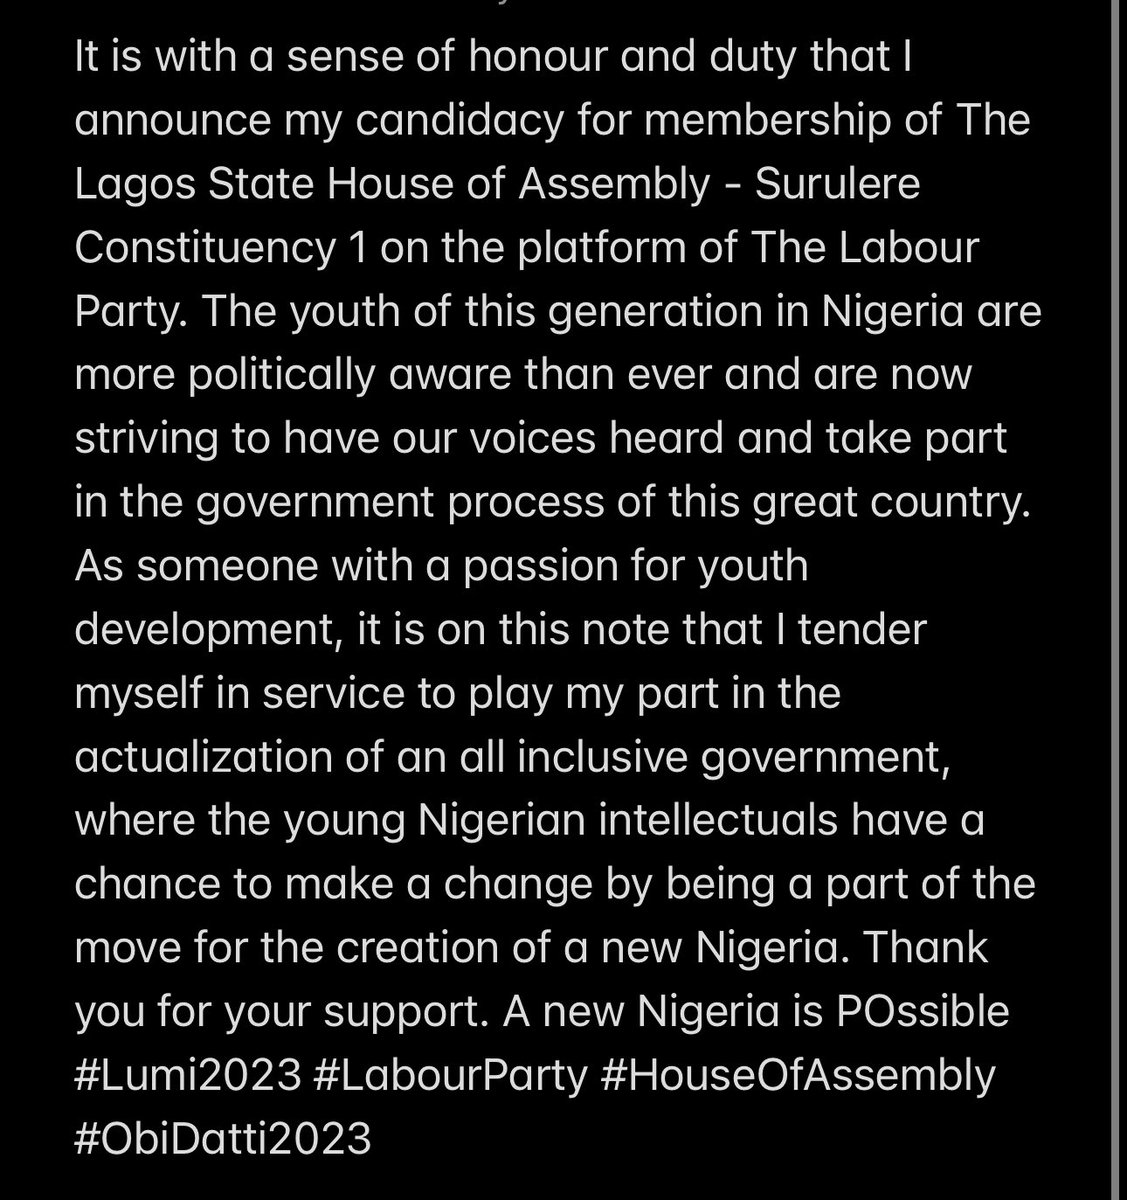 My name is Hon. Olumide Abiodun Oworu, and I am here to serve. Thank you for your support. #Lumi2023 #ObiDatti2023 #HouseOfAssembly #Surulere #LabourParty